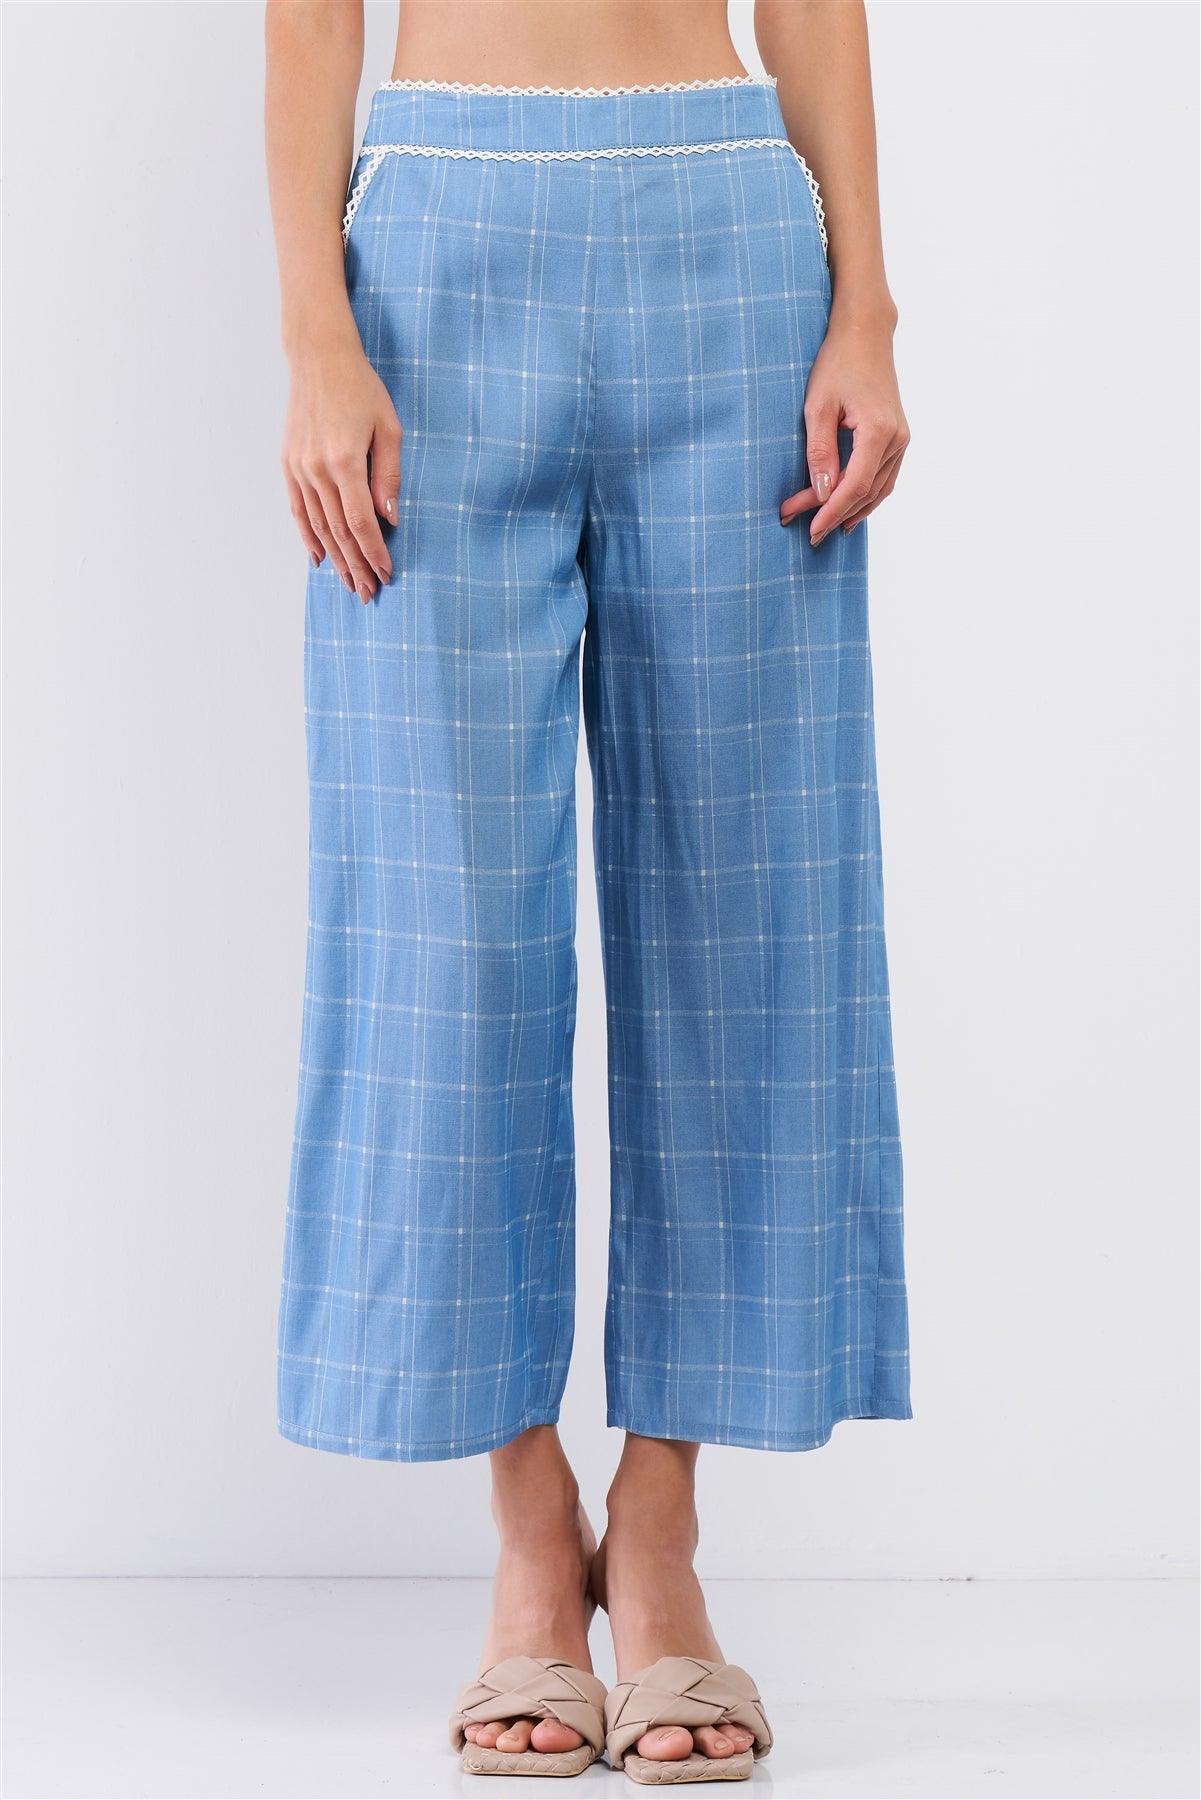 Baby Blue High Waisted Checkered White Lace Trim Wide Leg Pants /3-2-1